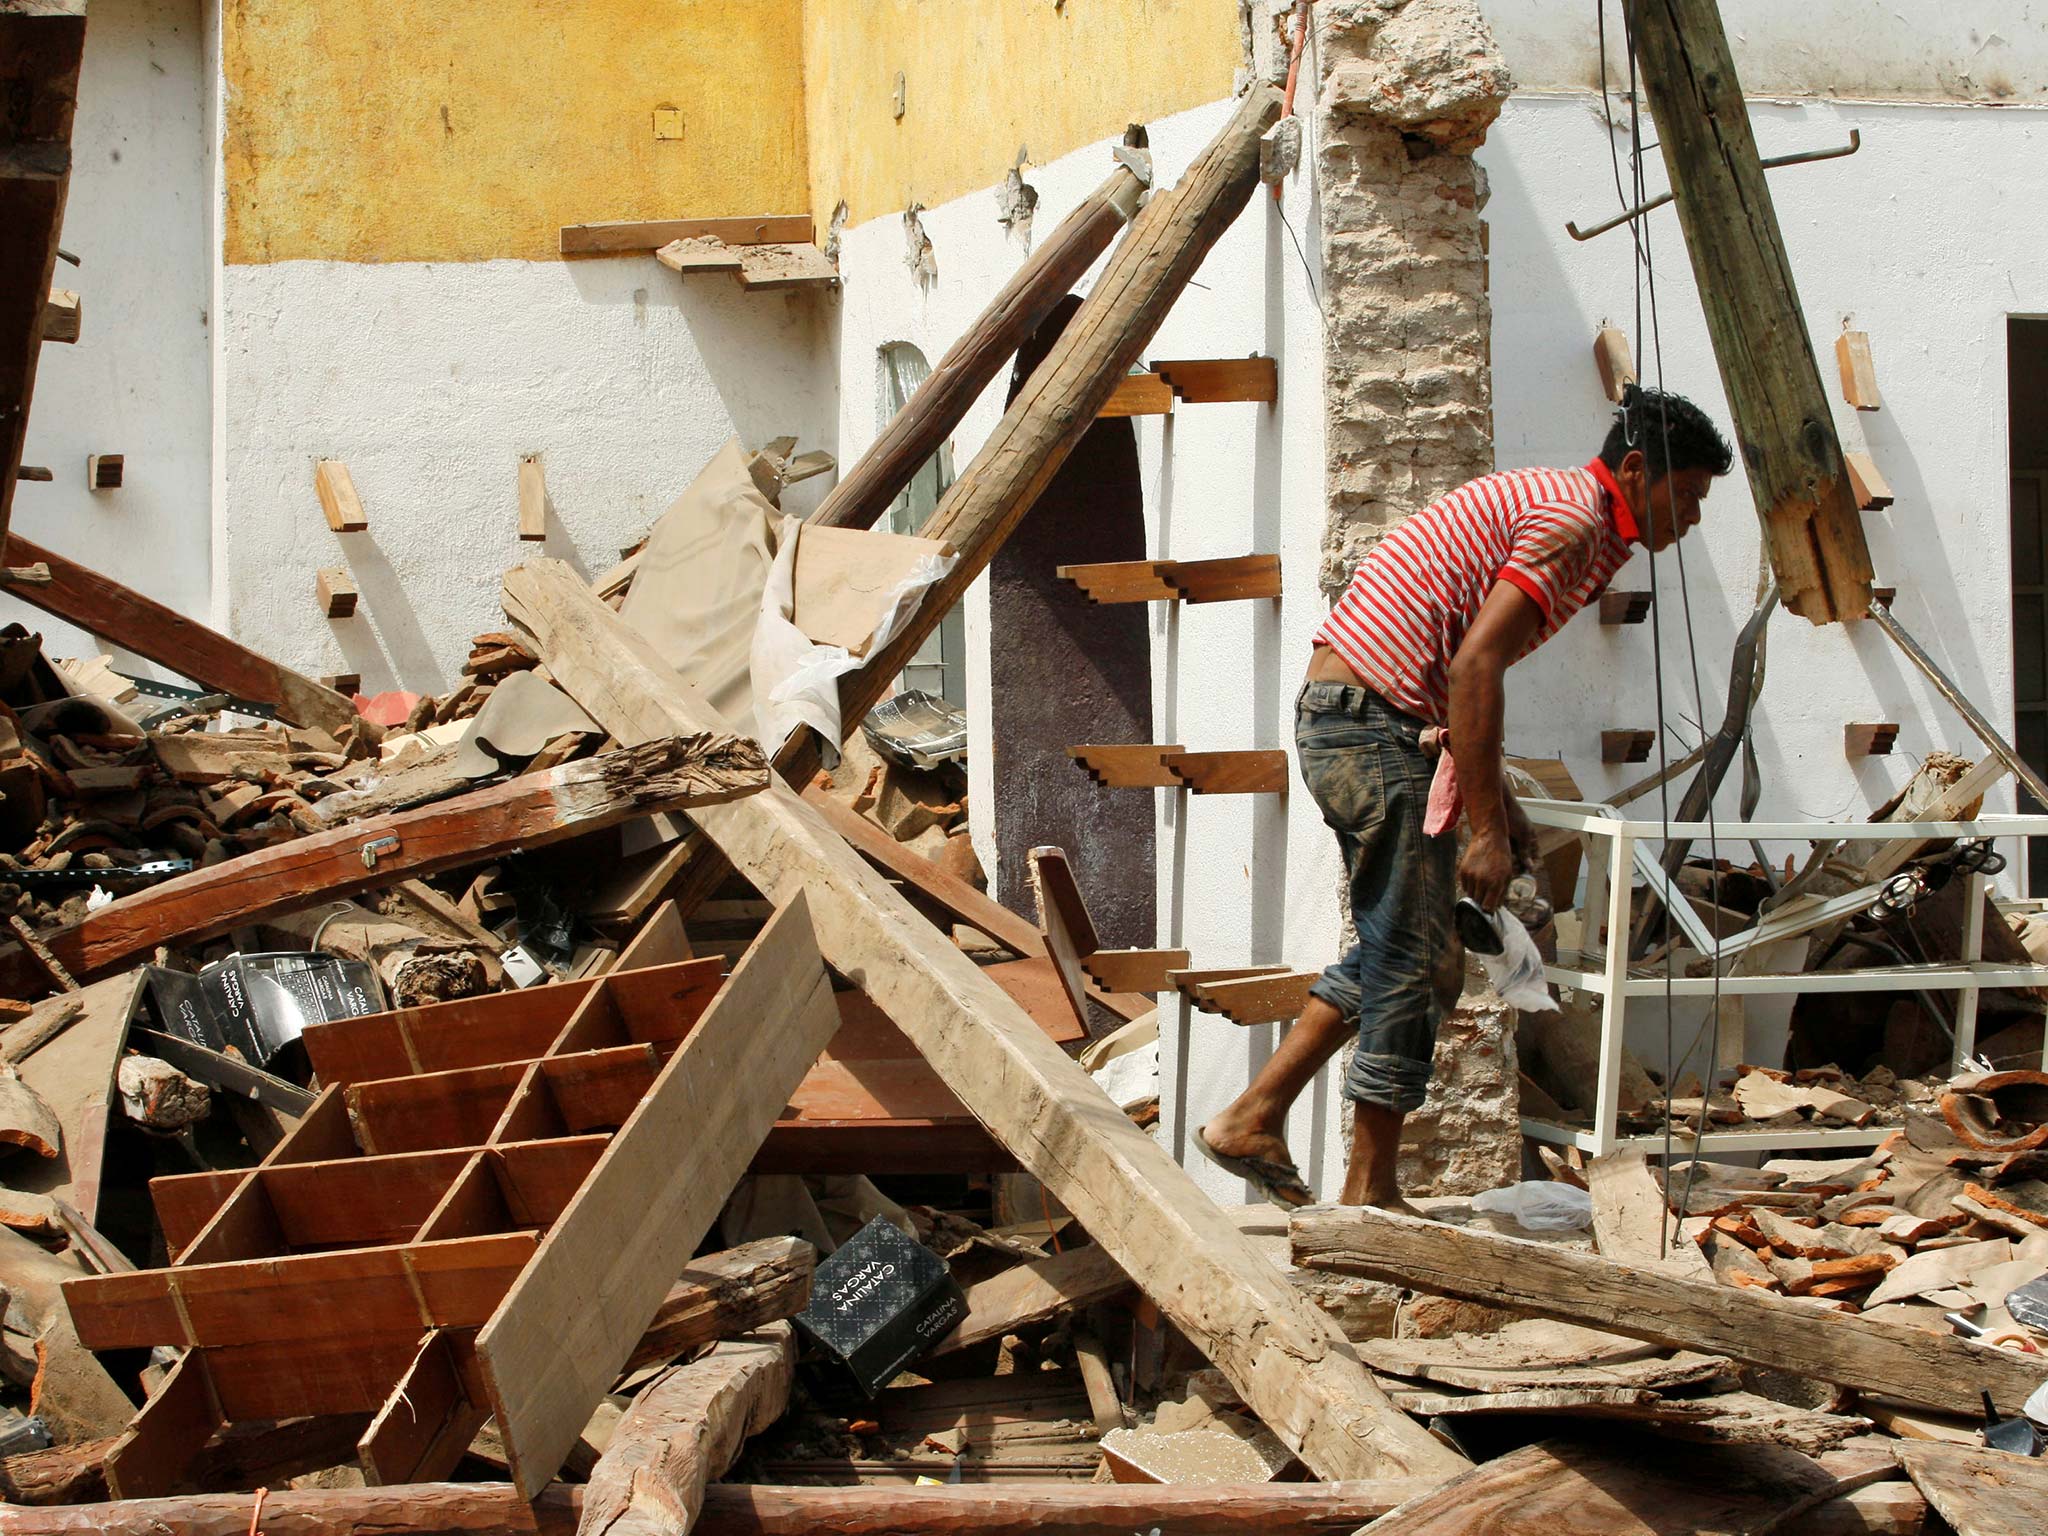 Juchitan was the worst affected area, with 36 people known to have died in the town